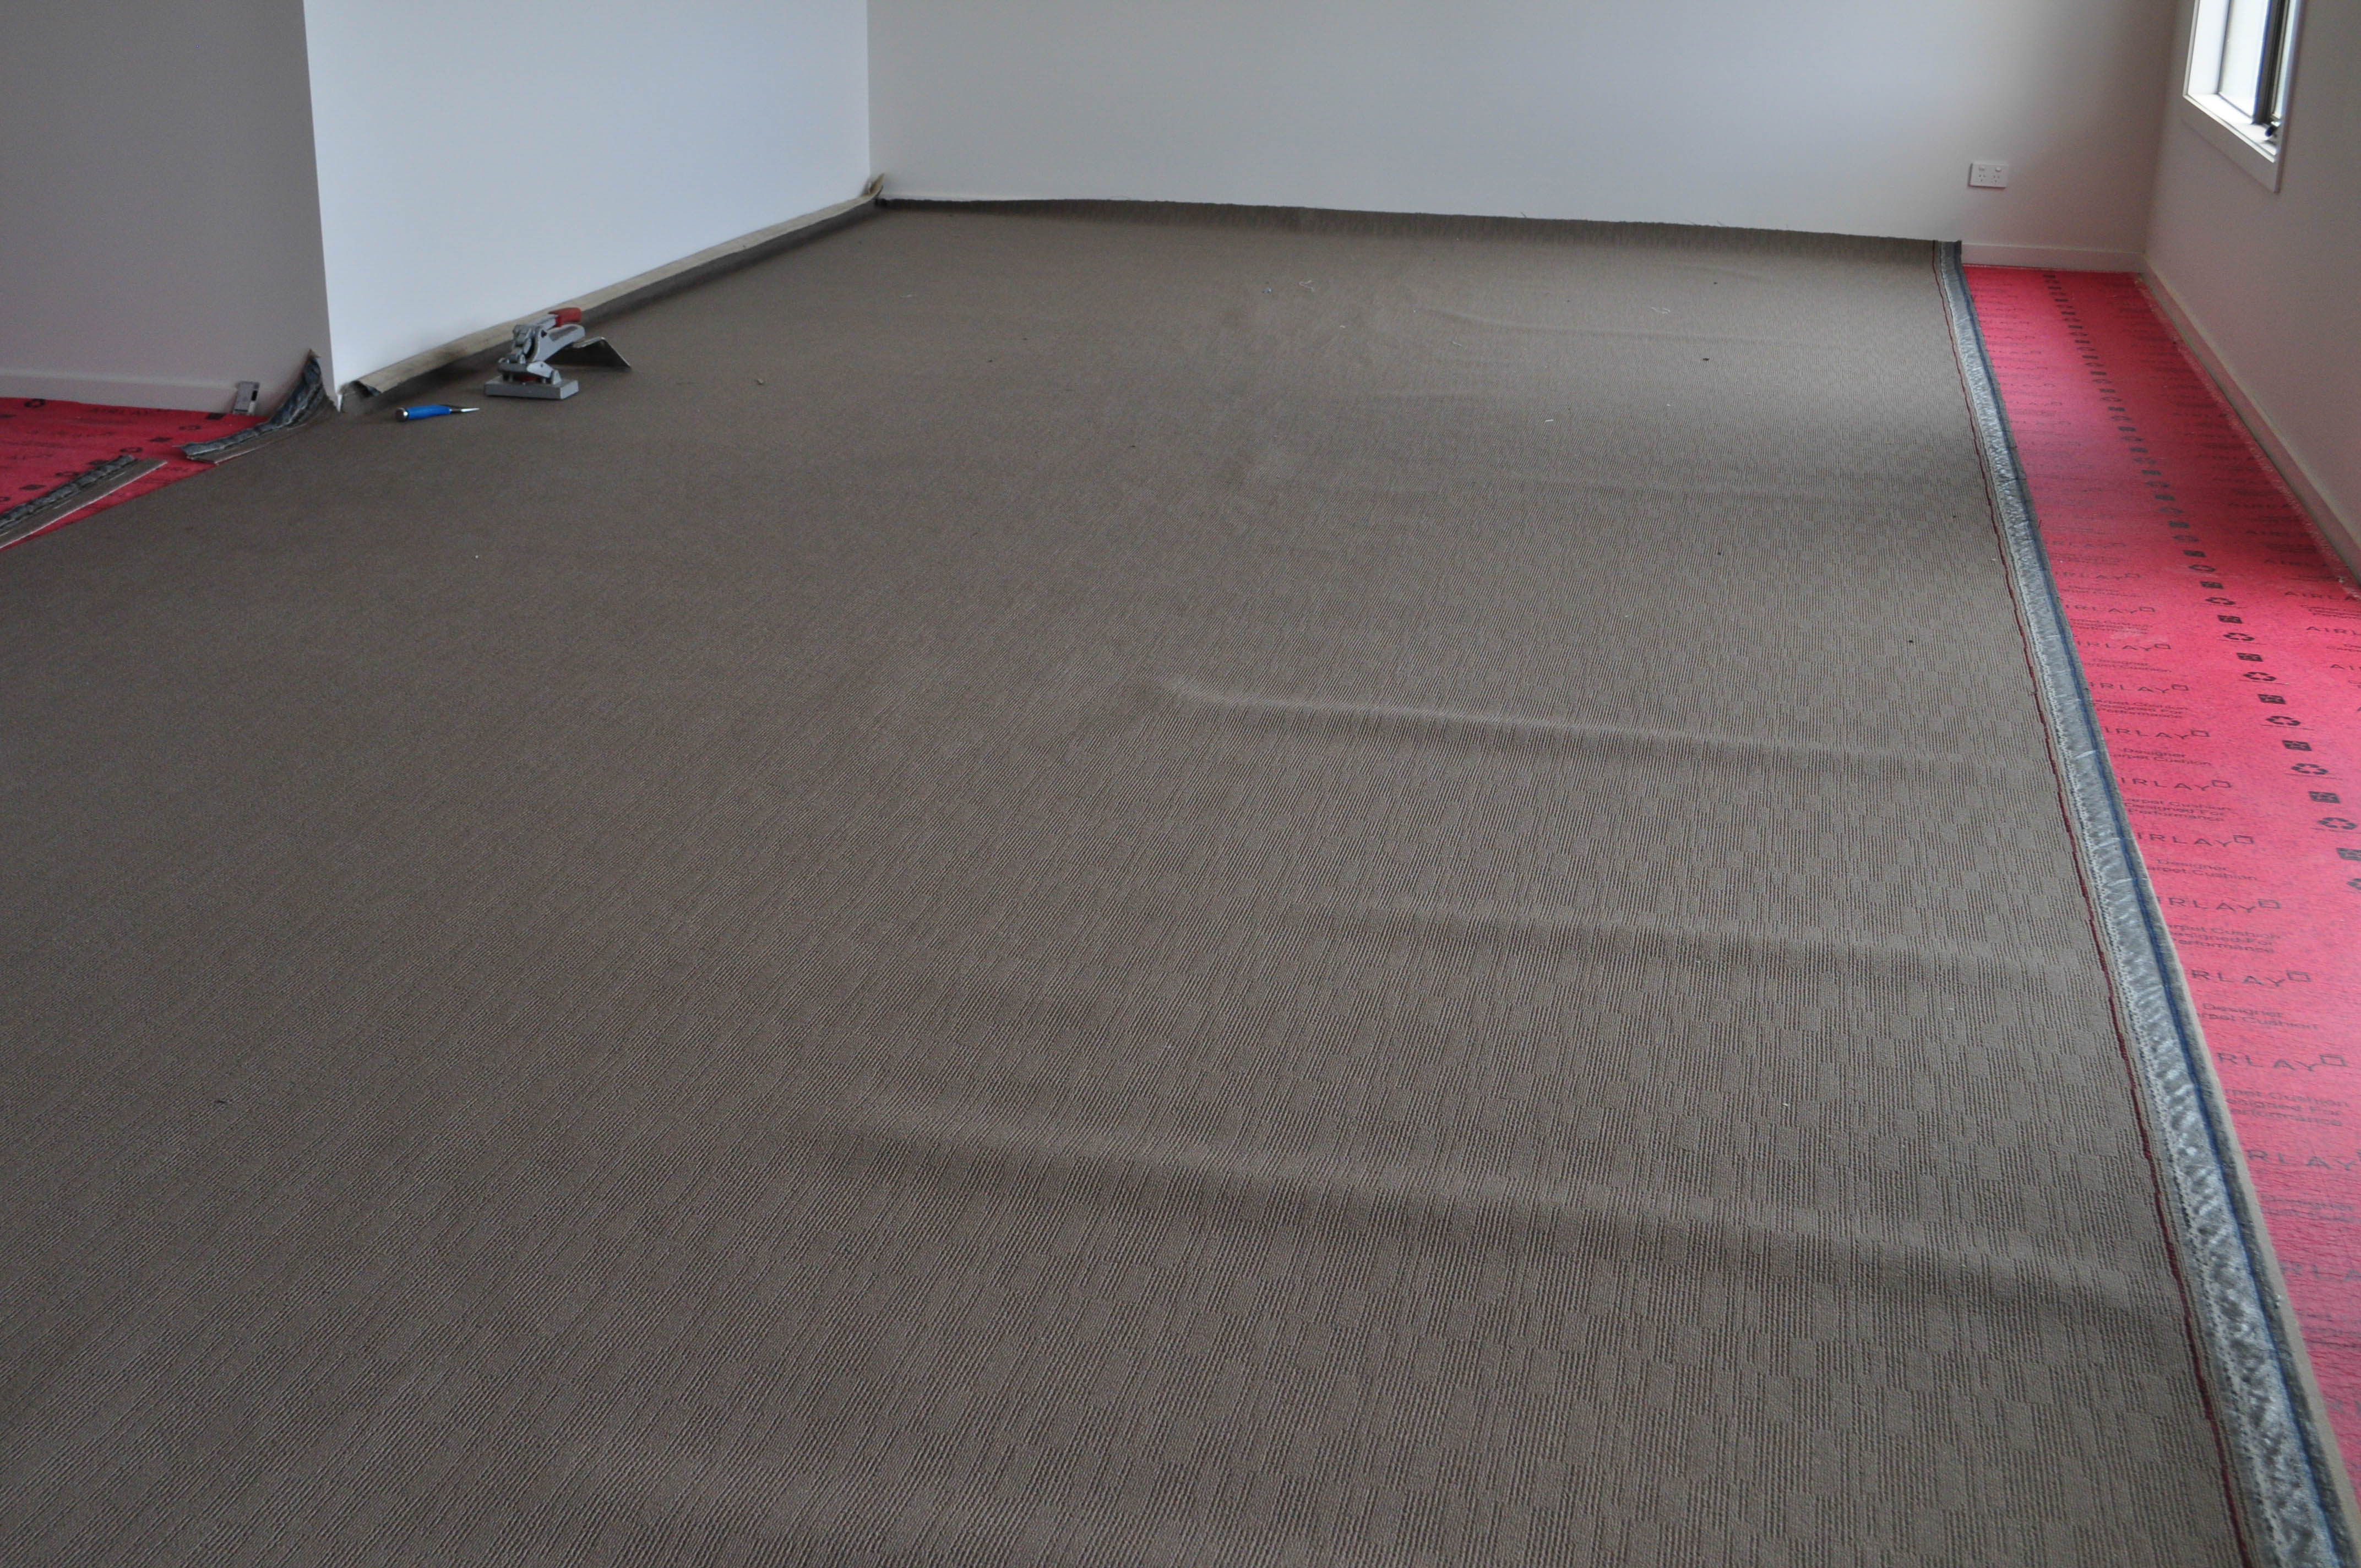 carpet laying process under way by Concord Floors, showing a roll of carpet stretched out, on top of installed red underlay in a home in
 Point Cook, Werribee.